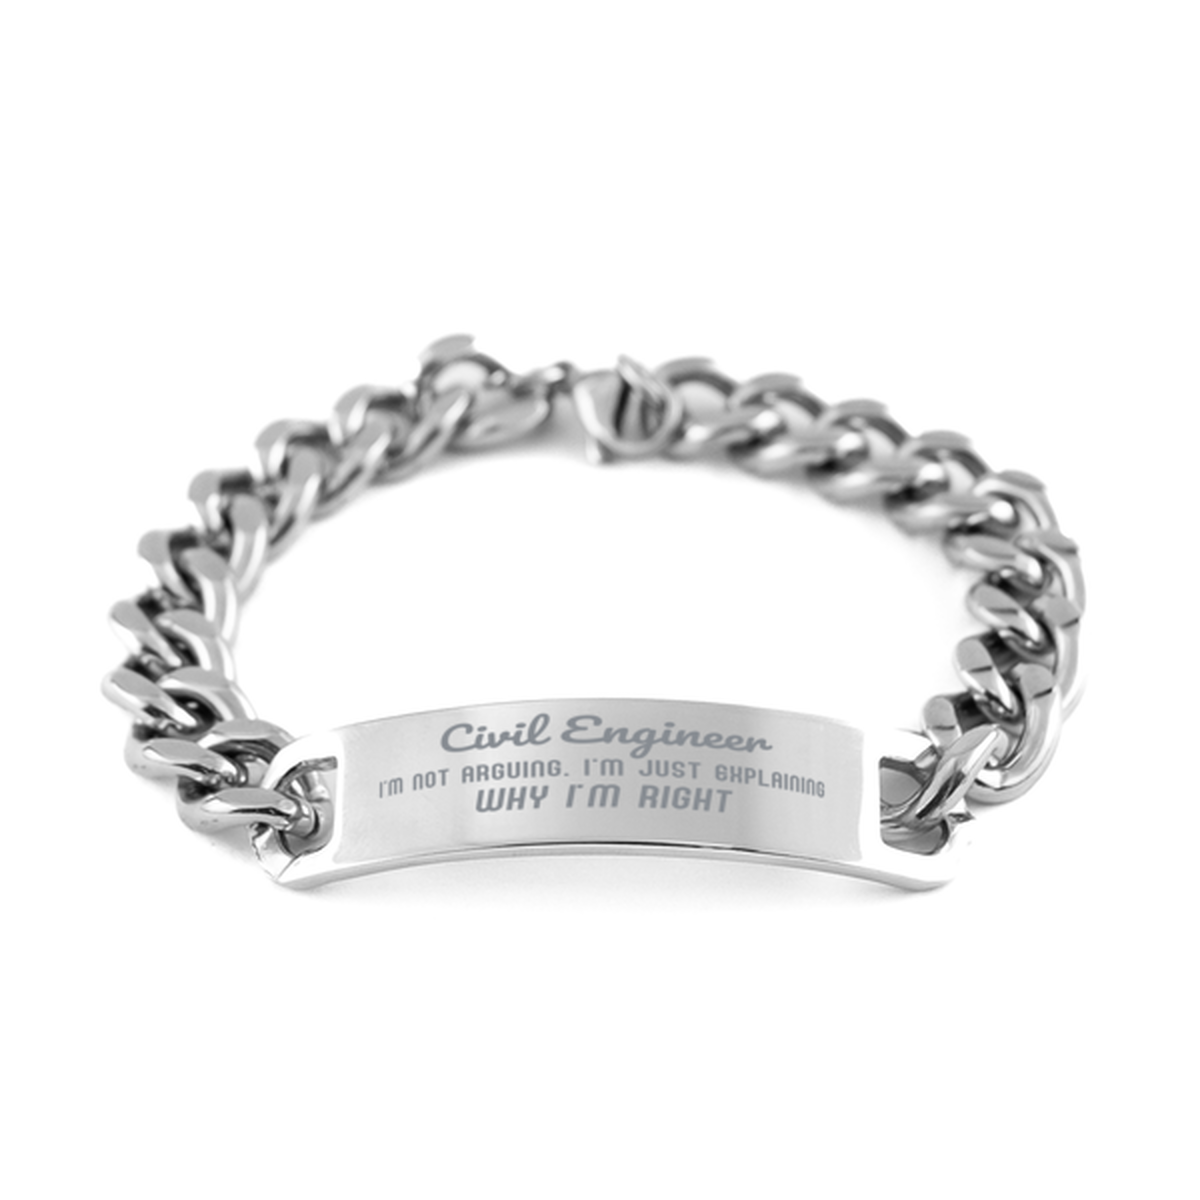 Civil Engineer I'm not Arguing. I'm Just Explaining Why I'm RIGHT Cuban Chain Stainless Steel Bracelet, Graduation Birthday Christmas Civil Engineer Gifts For Civil Engineer Funny Saying Quote Present for Men Women Coworker